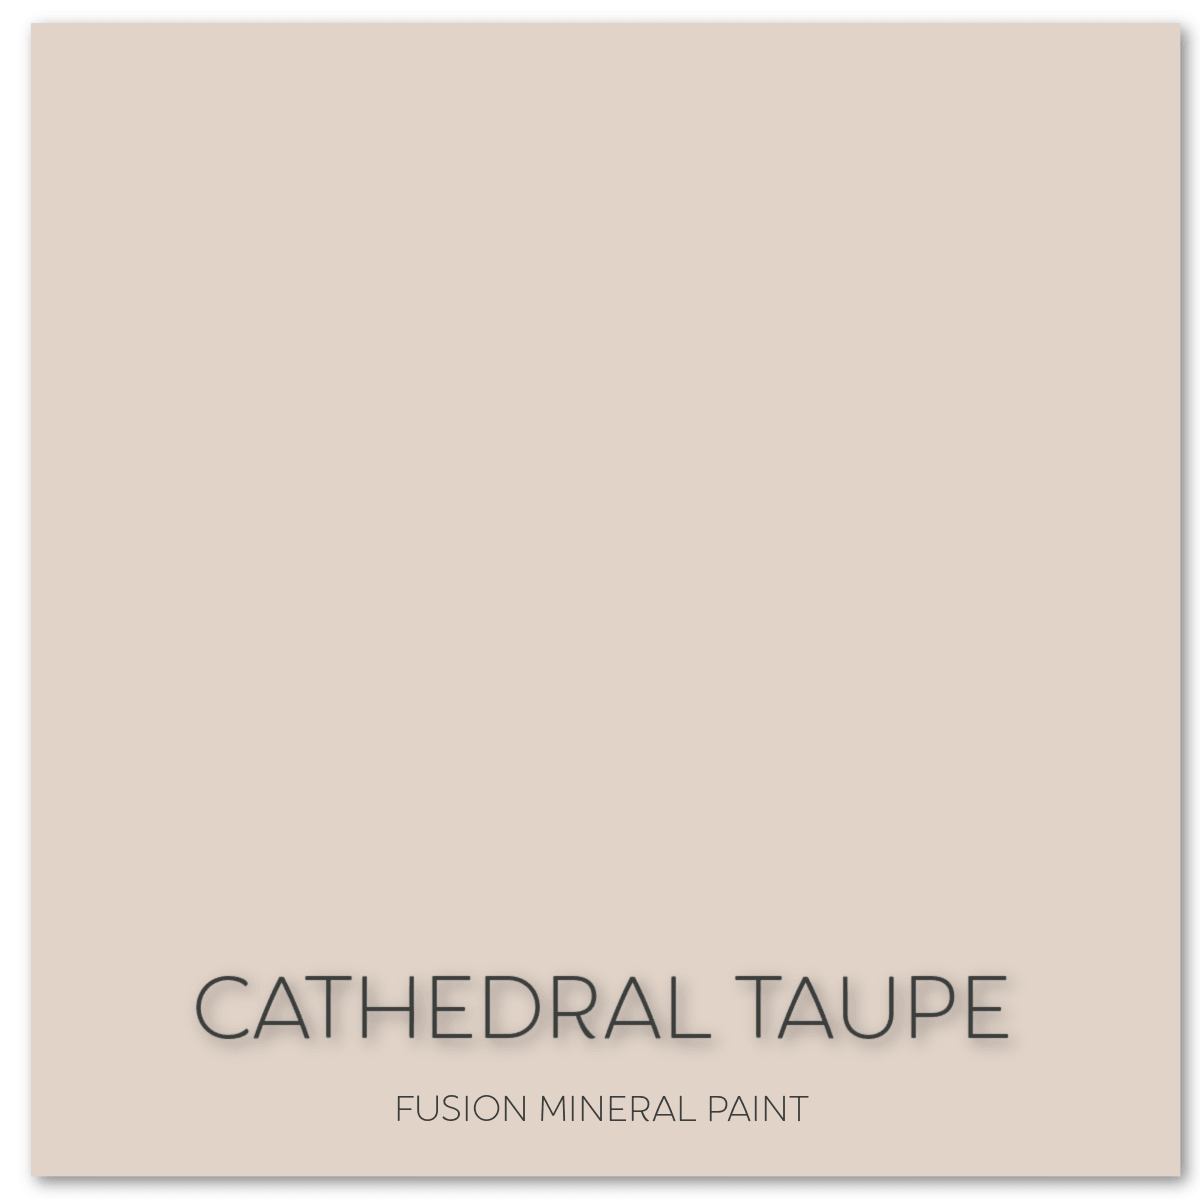 Fusion Mineral Paint<br/>CATHEDRAL TAUPE — VINTAGE 61 STOREHOUSE